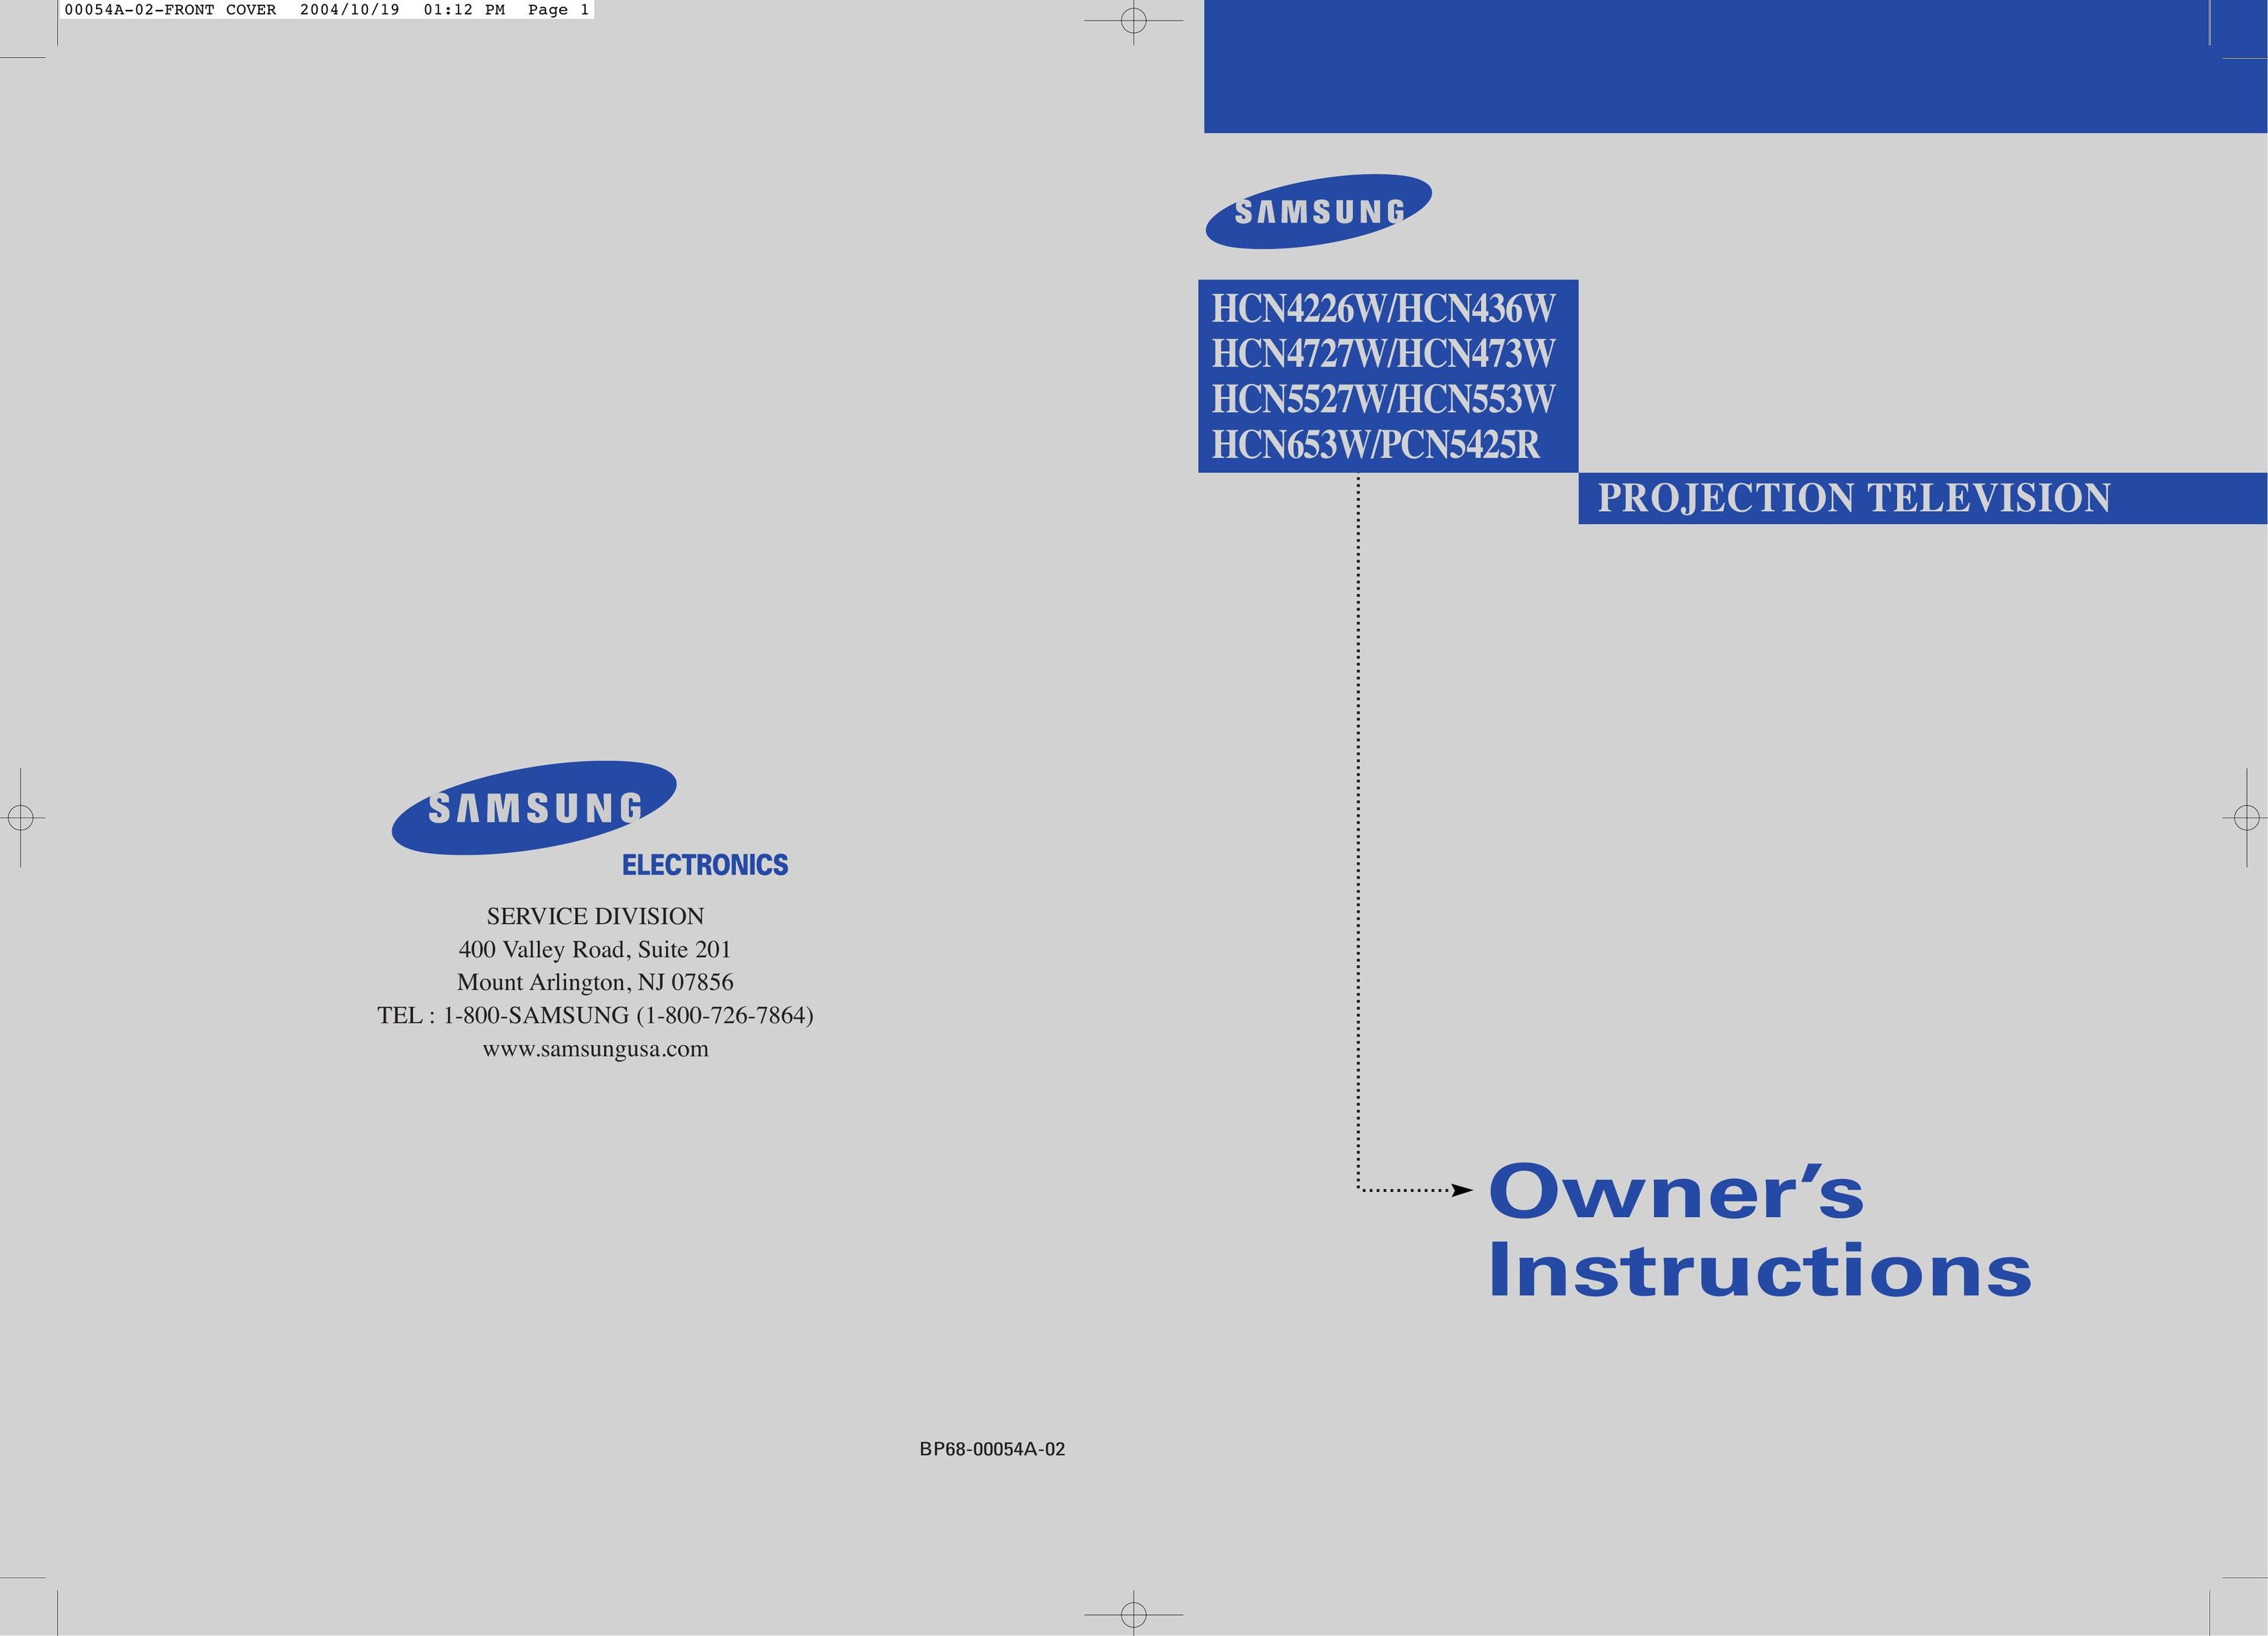 Samsung HCN473W Projection Television User Manual